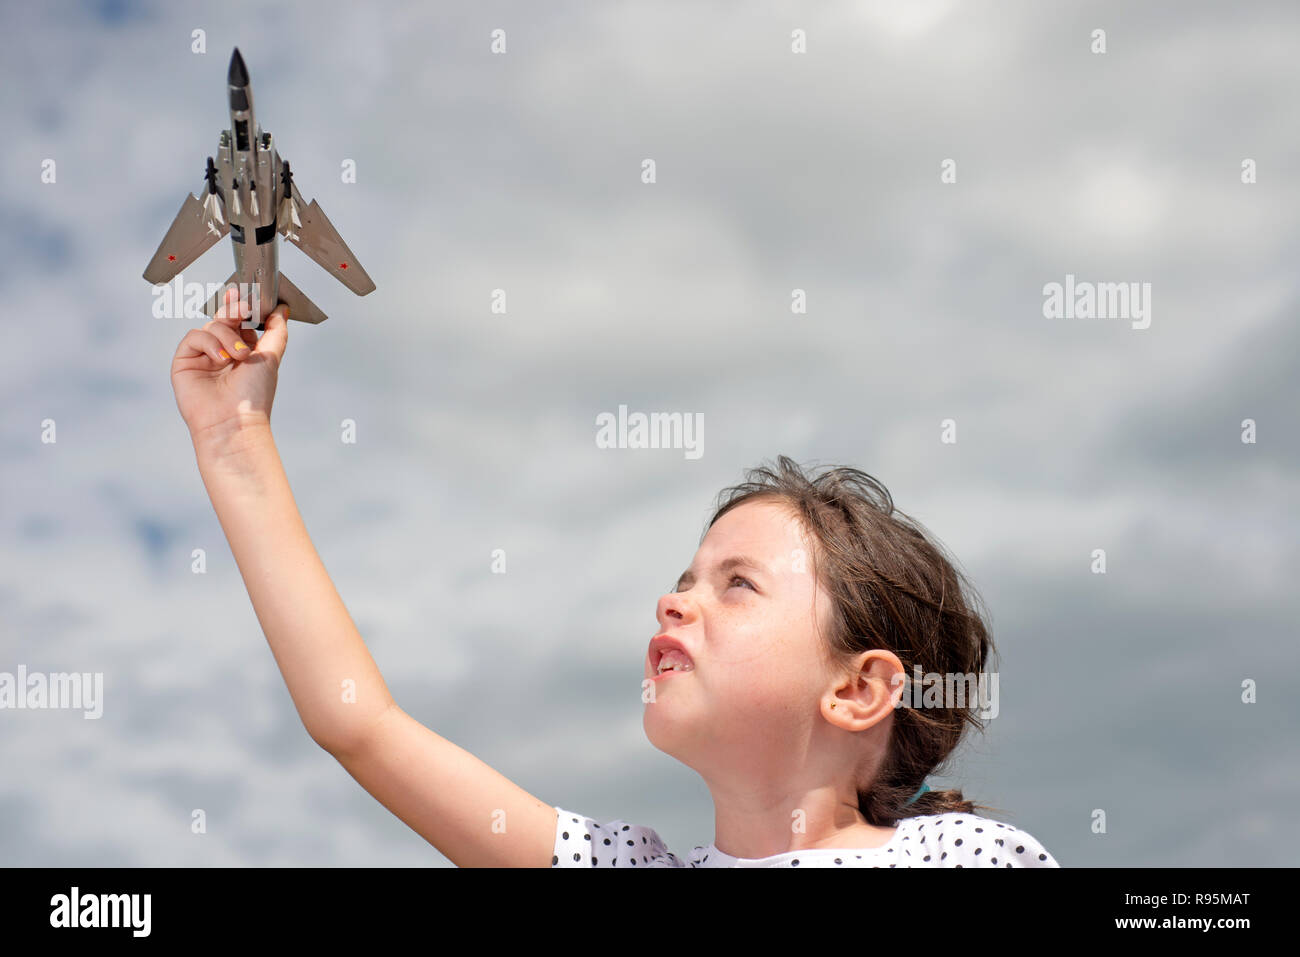 Young girl playing with Russian fighter jet model Stock Photo